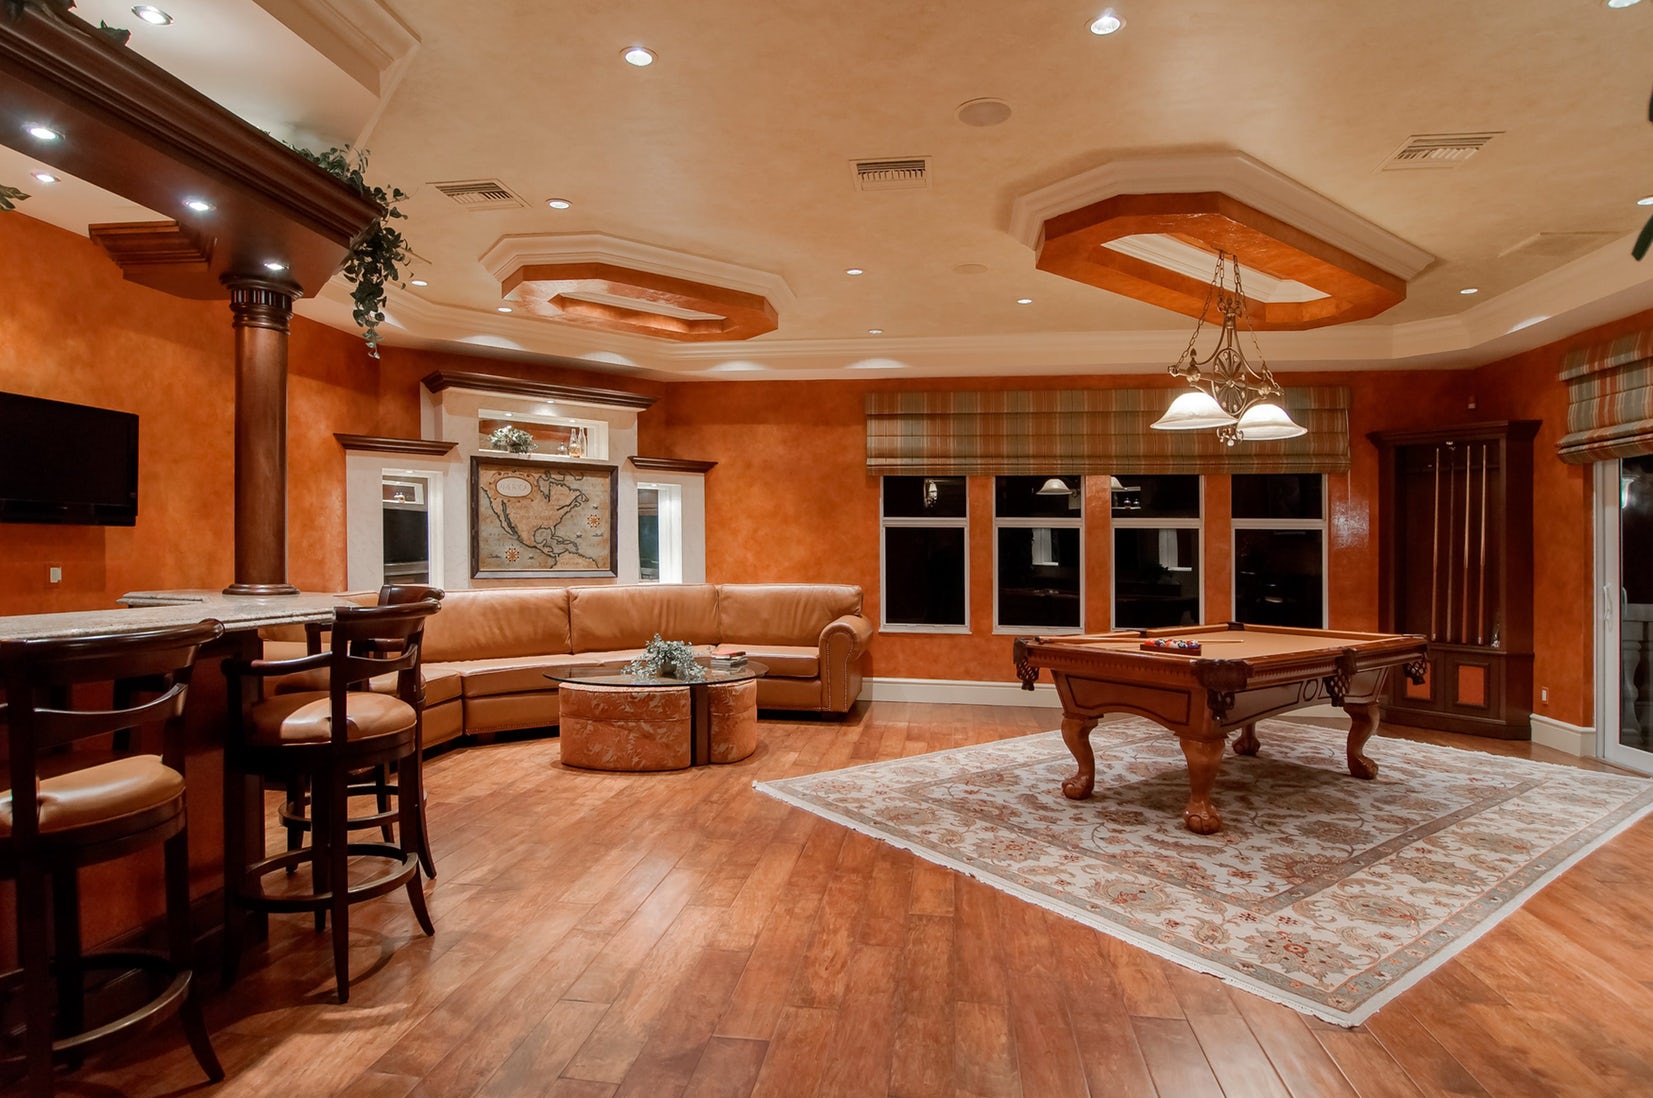 A spacious living room with a pool table and bar.